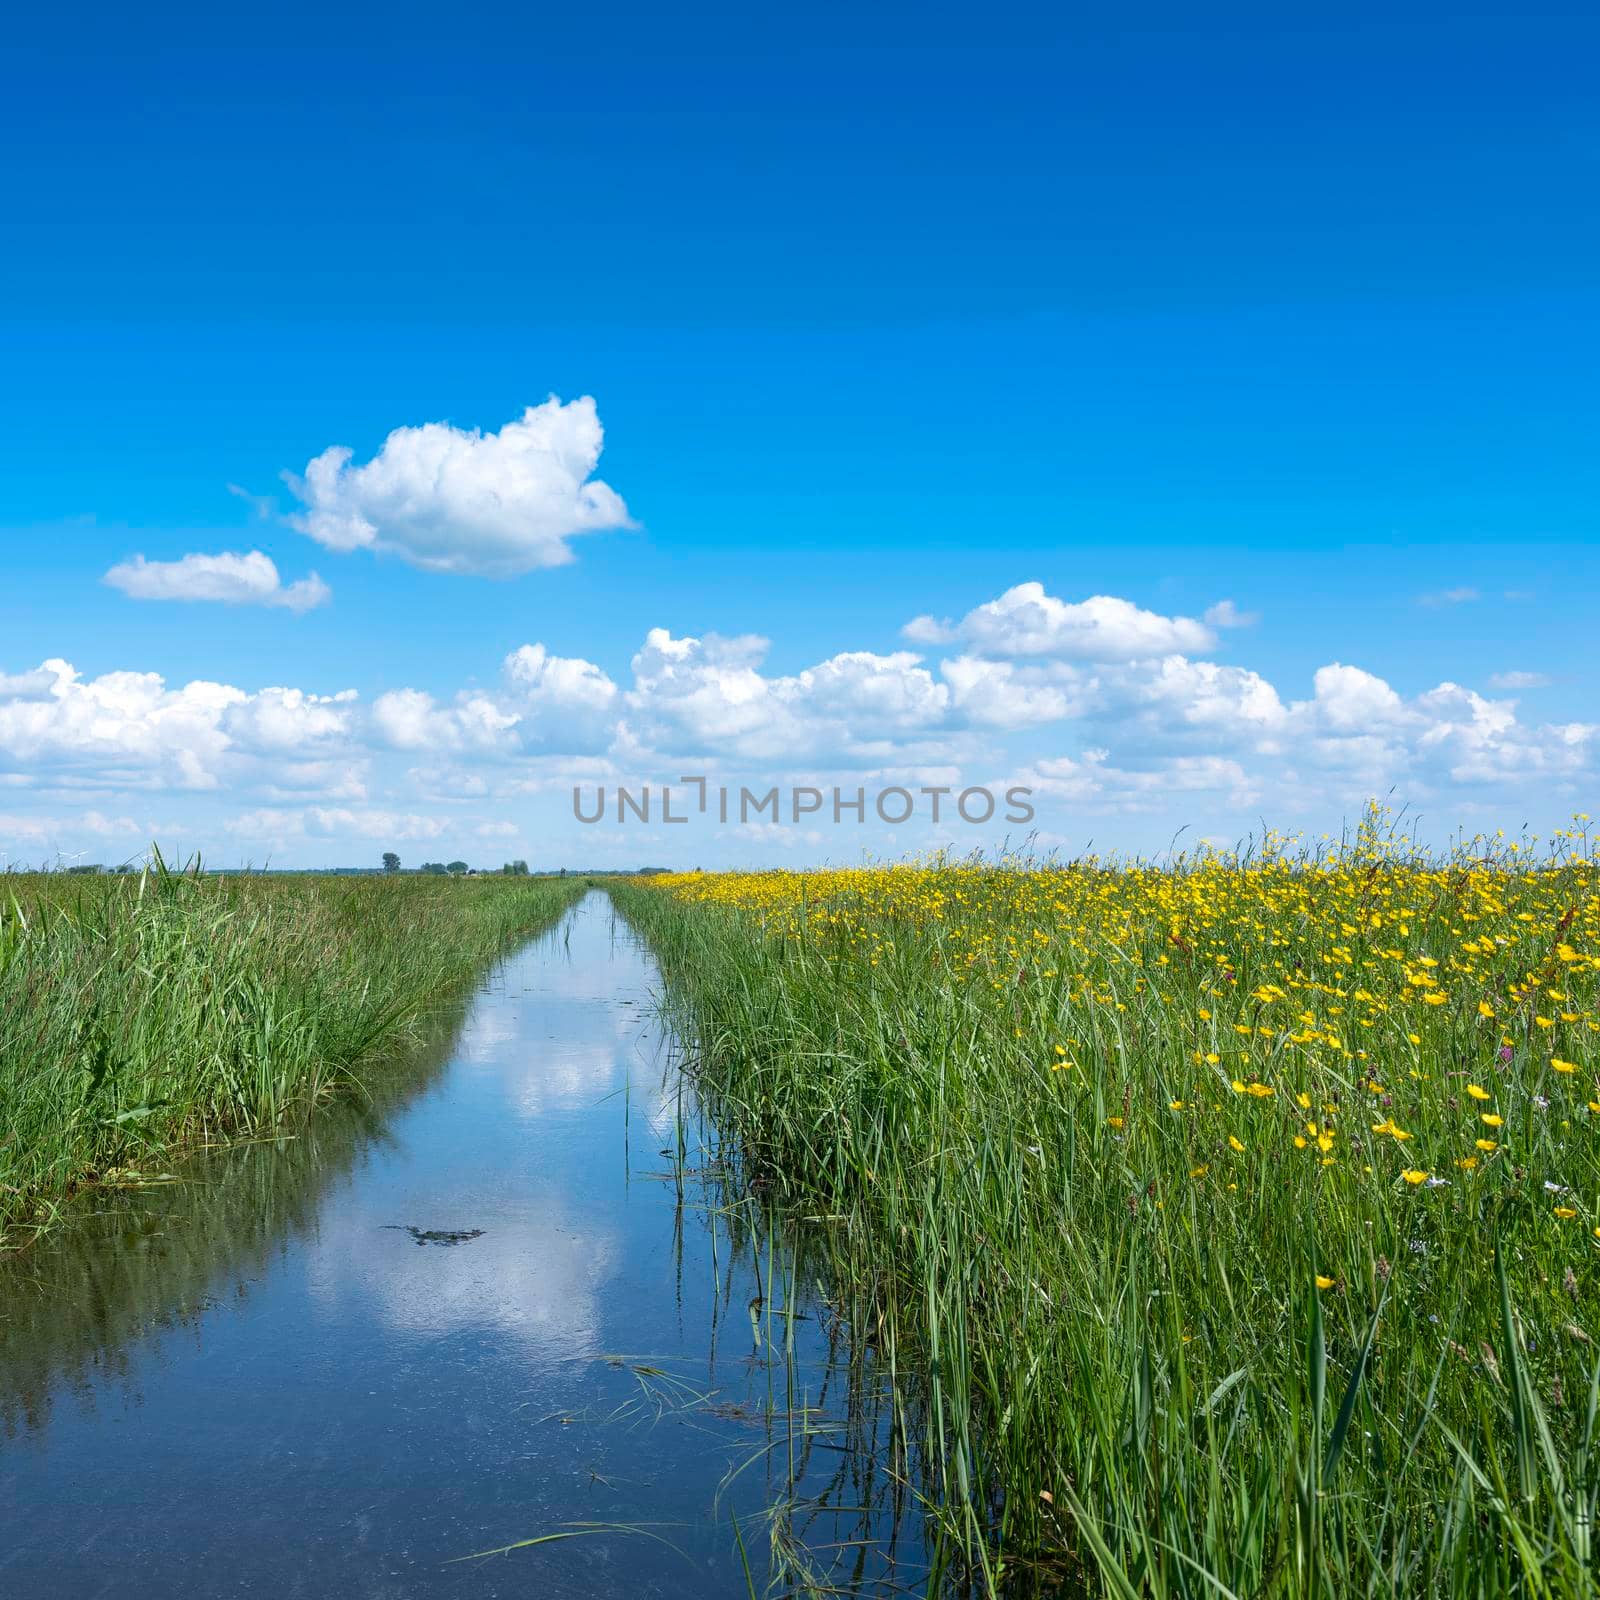 canal with reflection of blue sky and wild yellow flowers in dutch meadow landscape near amersfoort in the netherlands